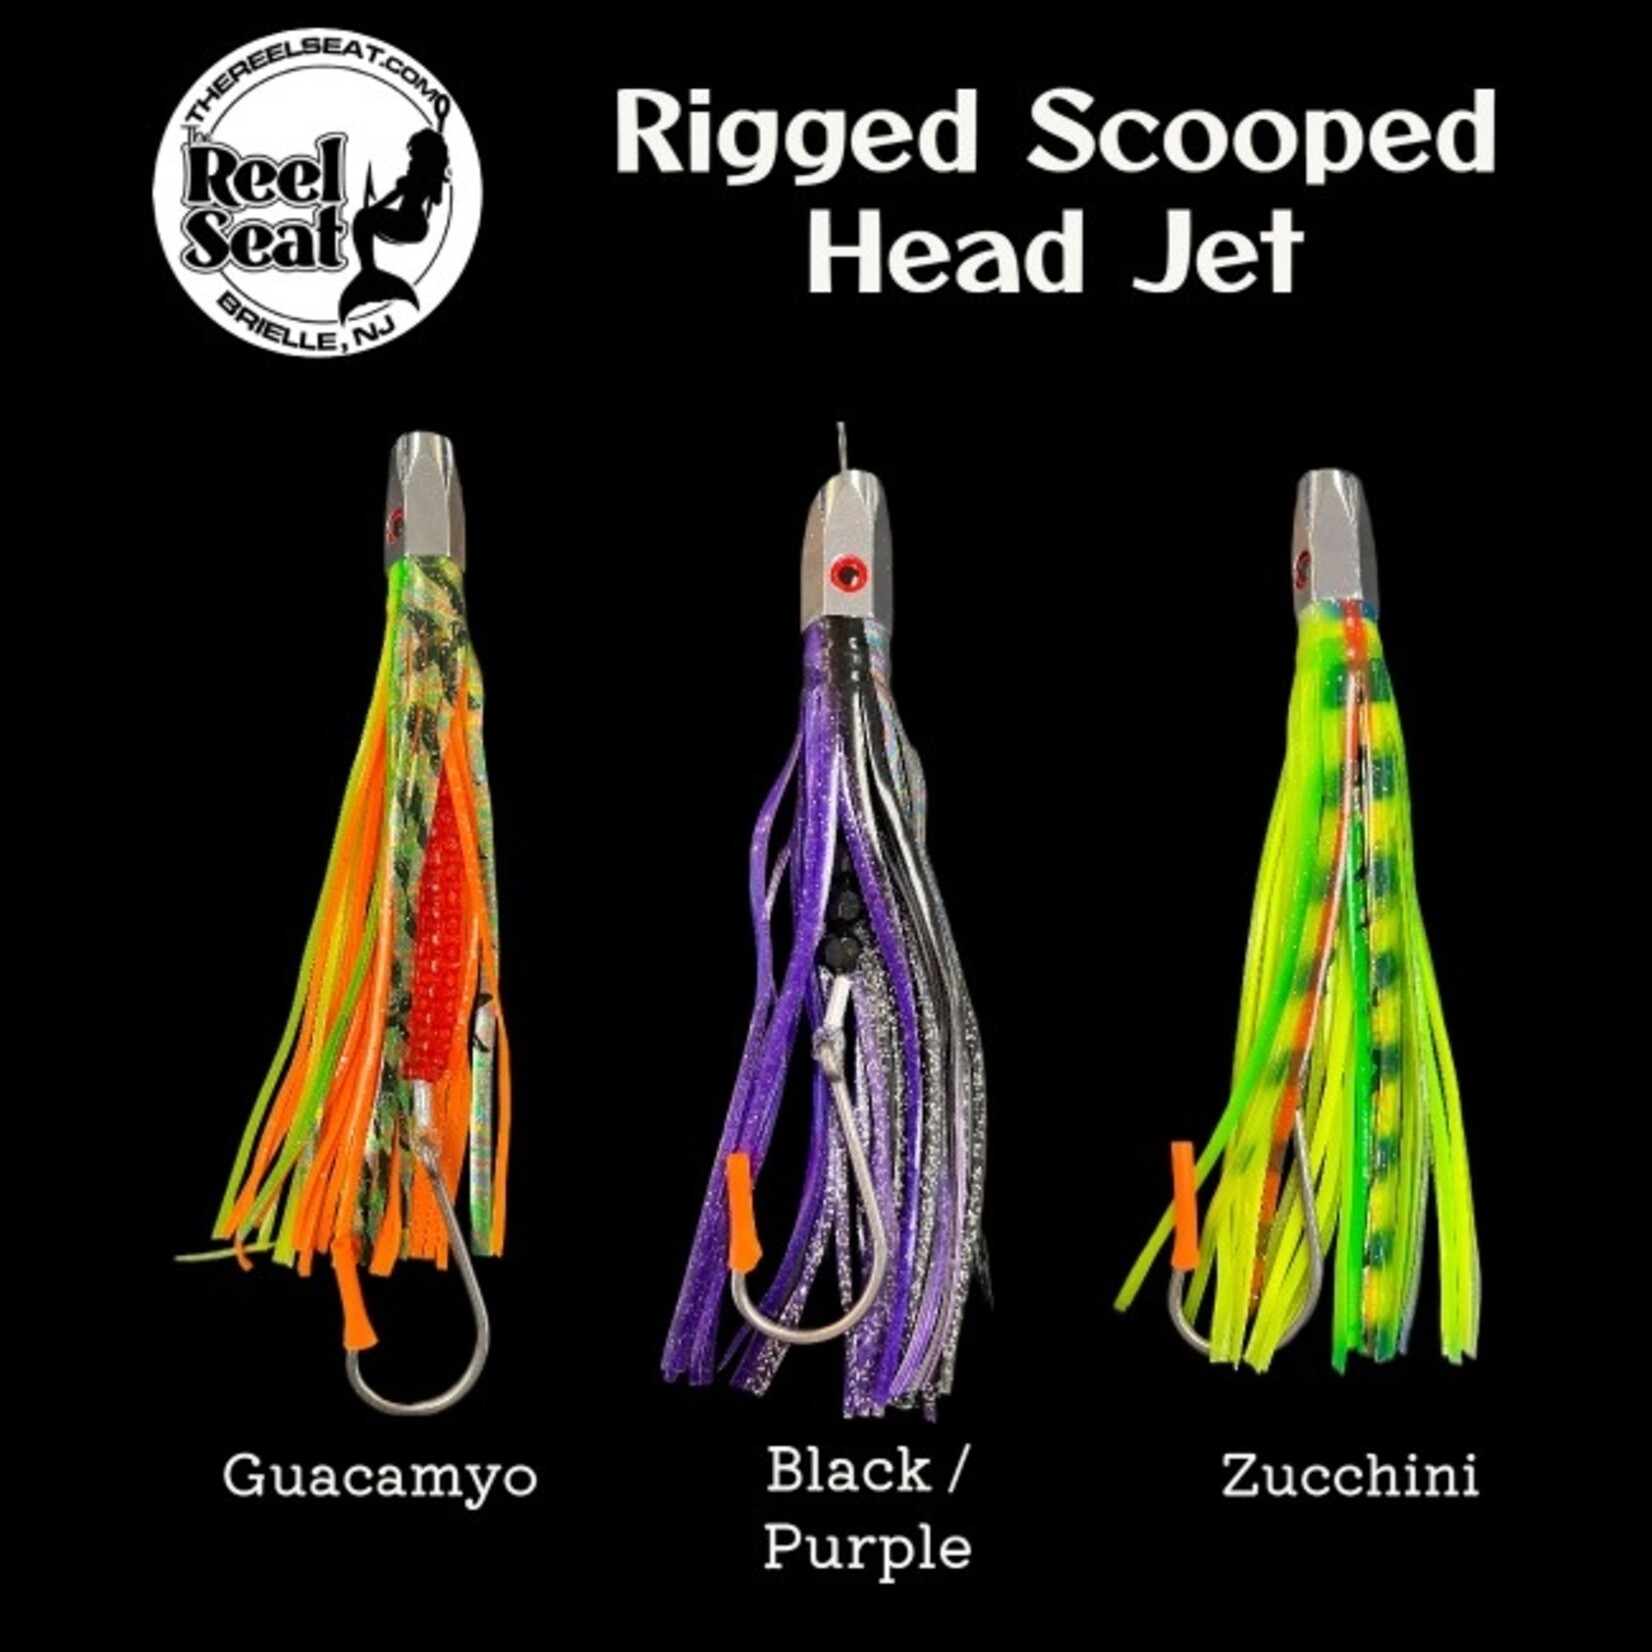 The Reel Seat RS Rigged Scooped Head Jet